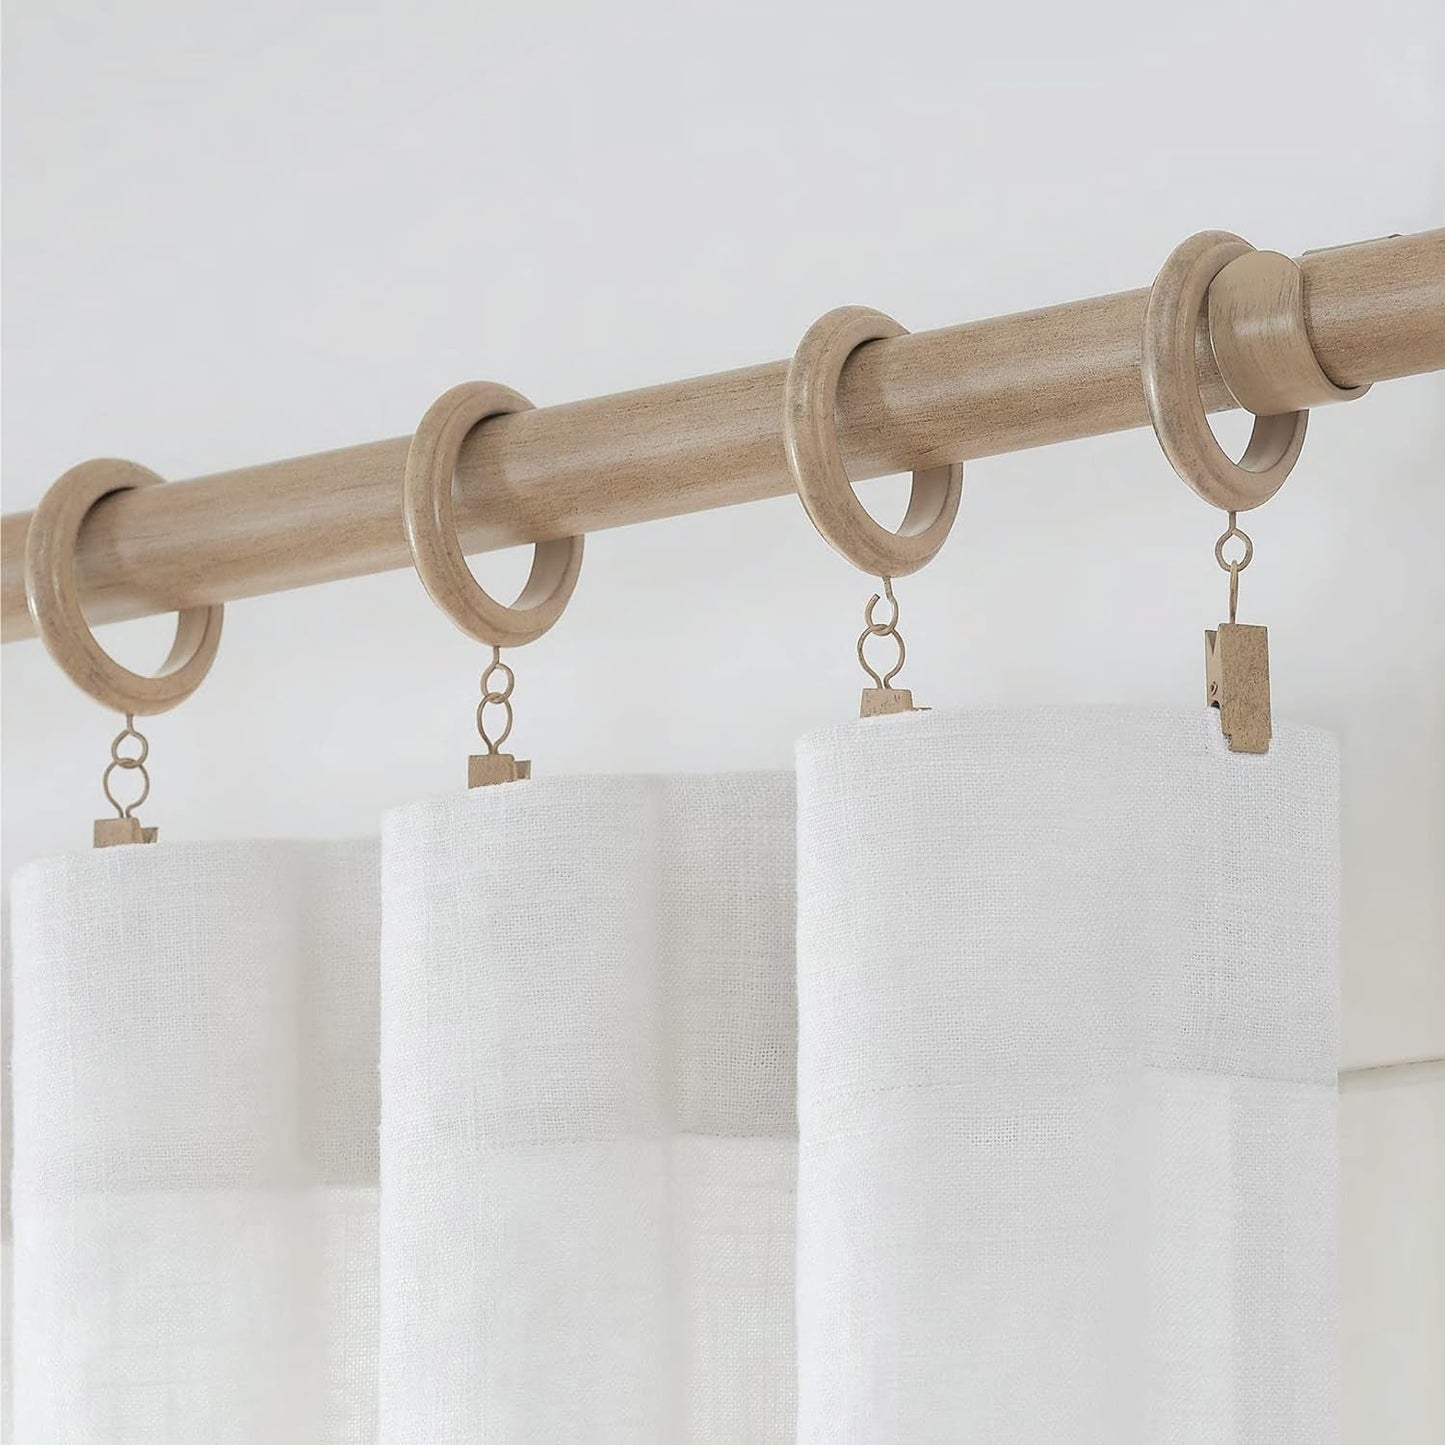 MODE Farmhouse Collection Beveled Curtain Clip Rings, Set of 14 Curtain Rings with Clips, Fits MODE Farmhouse Curtain Rod Sets, 1 3/4”, Weathered Oak